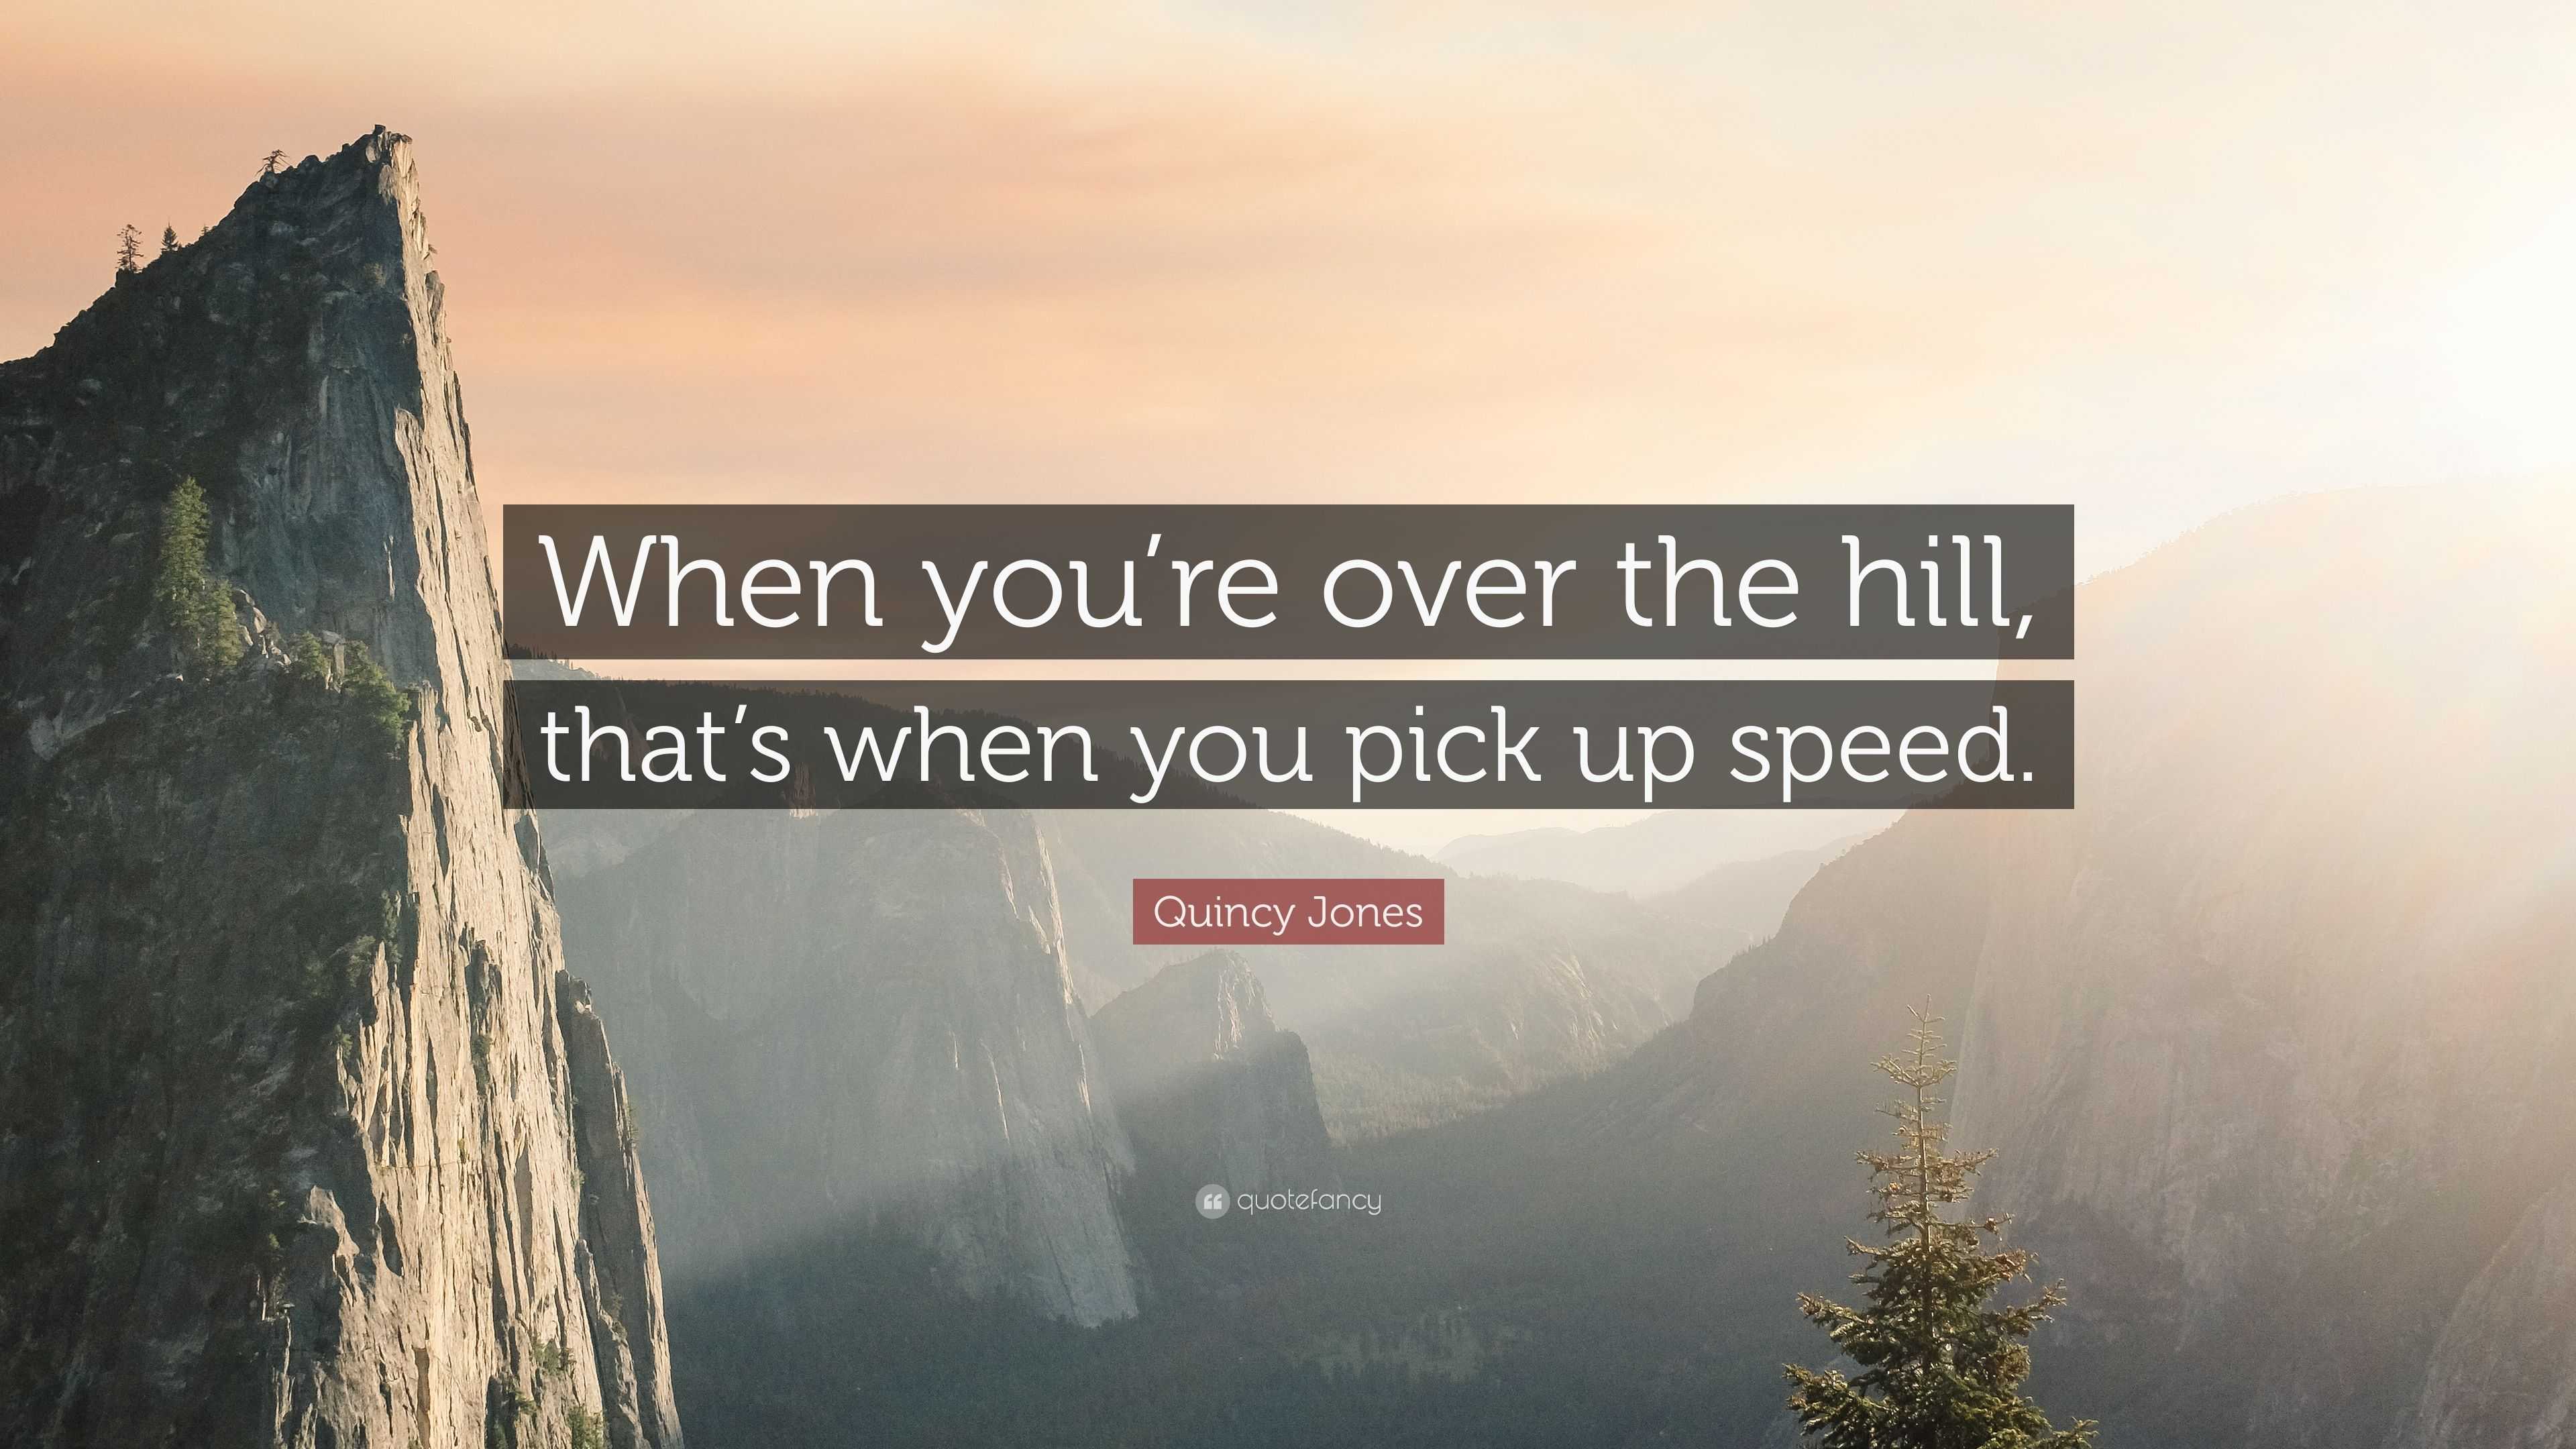 Quincy Jones Quote: “When you're over the hill, that's when you pick up  speed.”